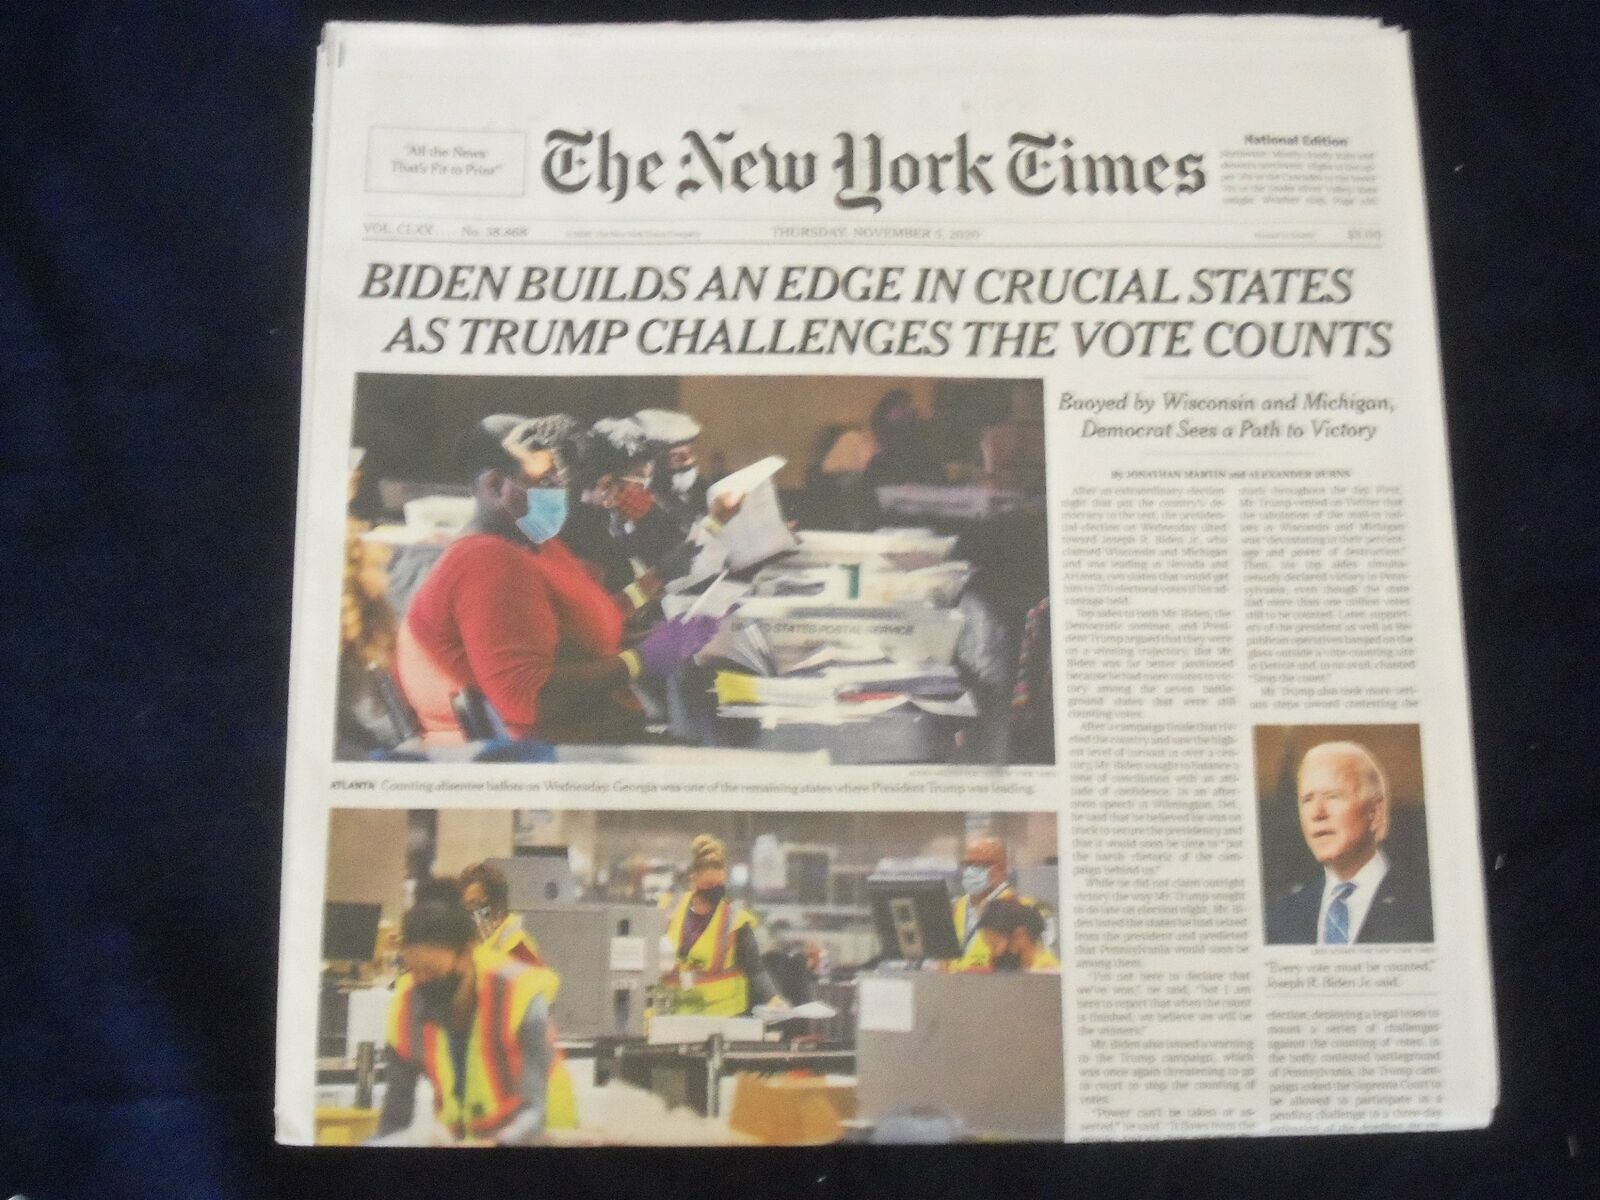 2020 NOV 5 NEW YORK TIMES- BIDEN BUILDS EDGE IN CRUCIAL STATES, TRUMP CHALLENGES